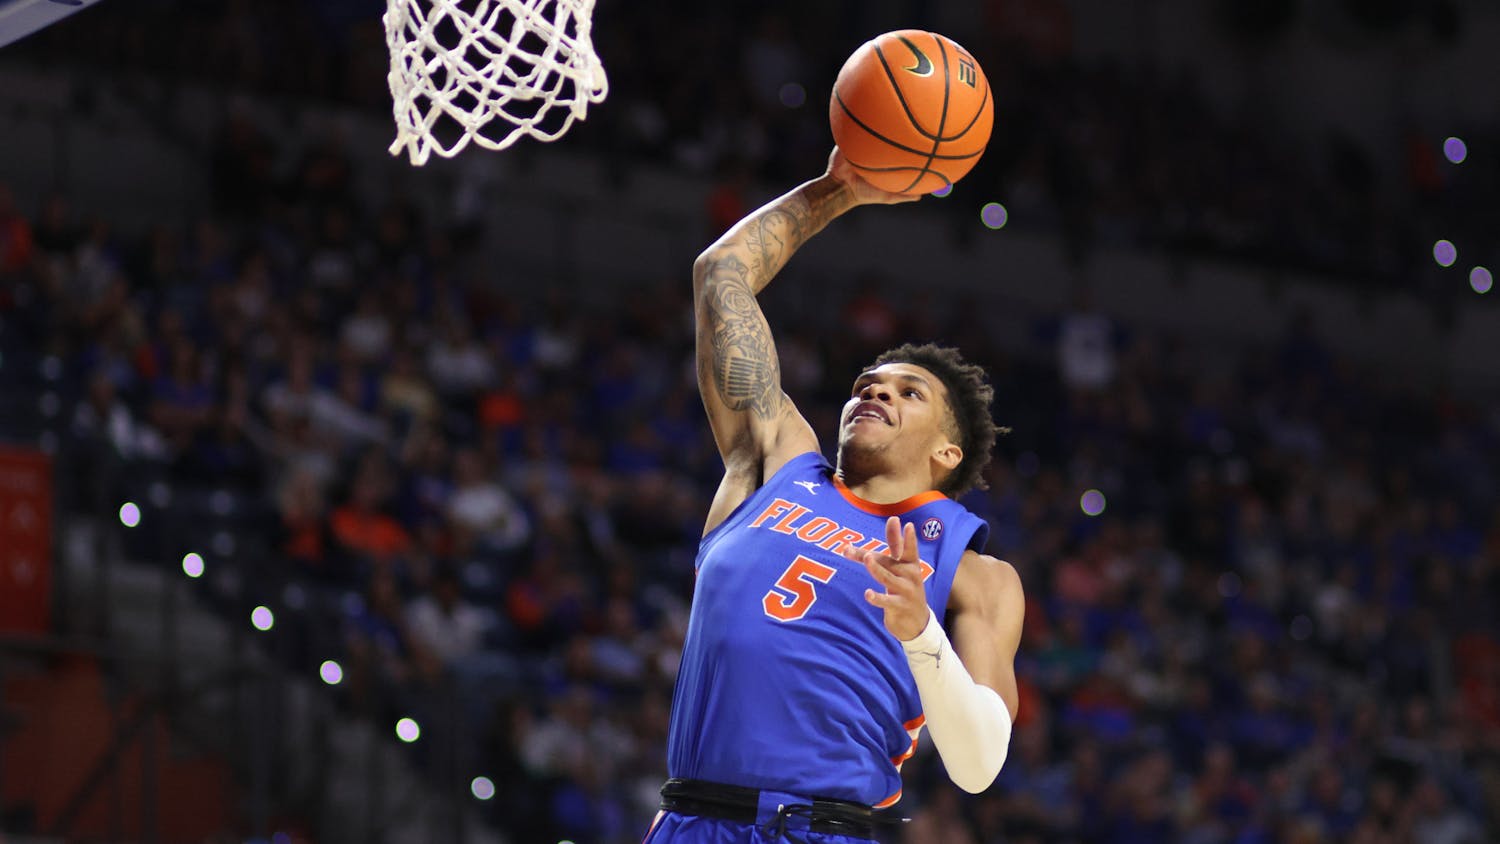 Junior guard Will Richard rises up for a dunk in the Gators' 89-68 win against the Florida State Seminoles on Friday, Nov. 17, 2023.